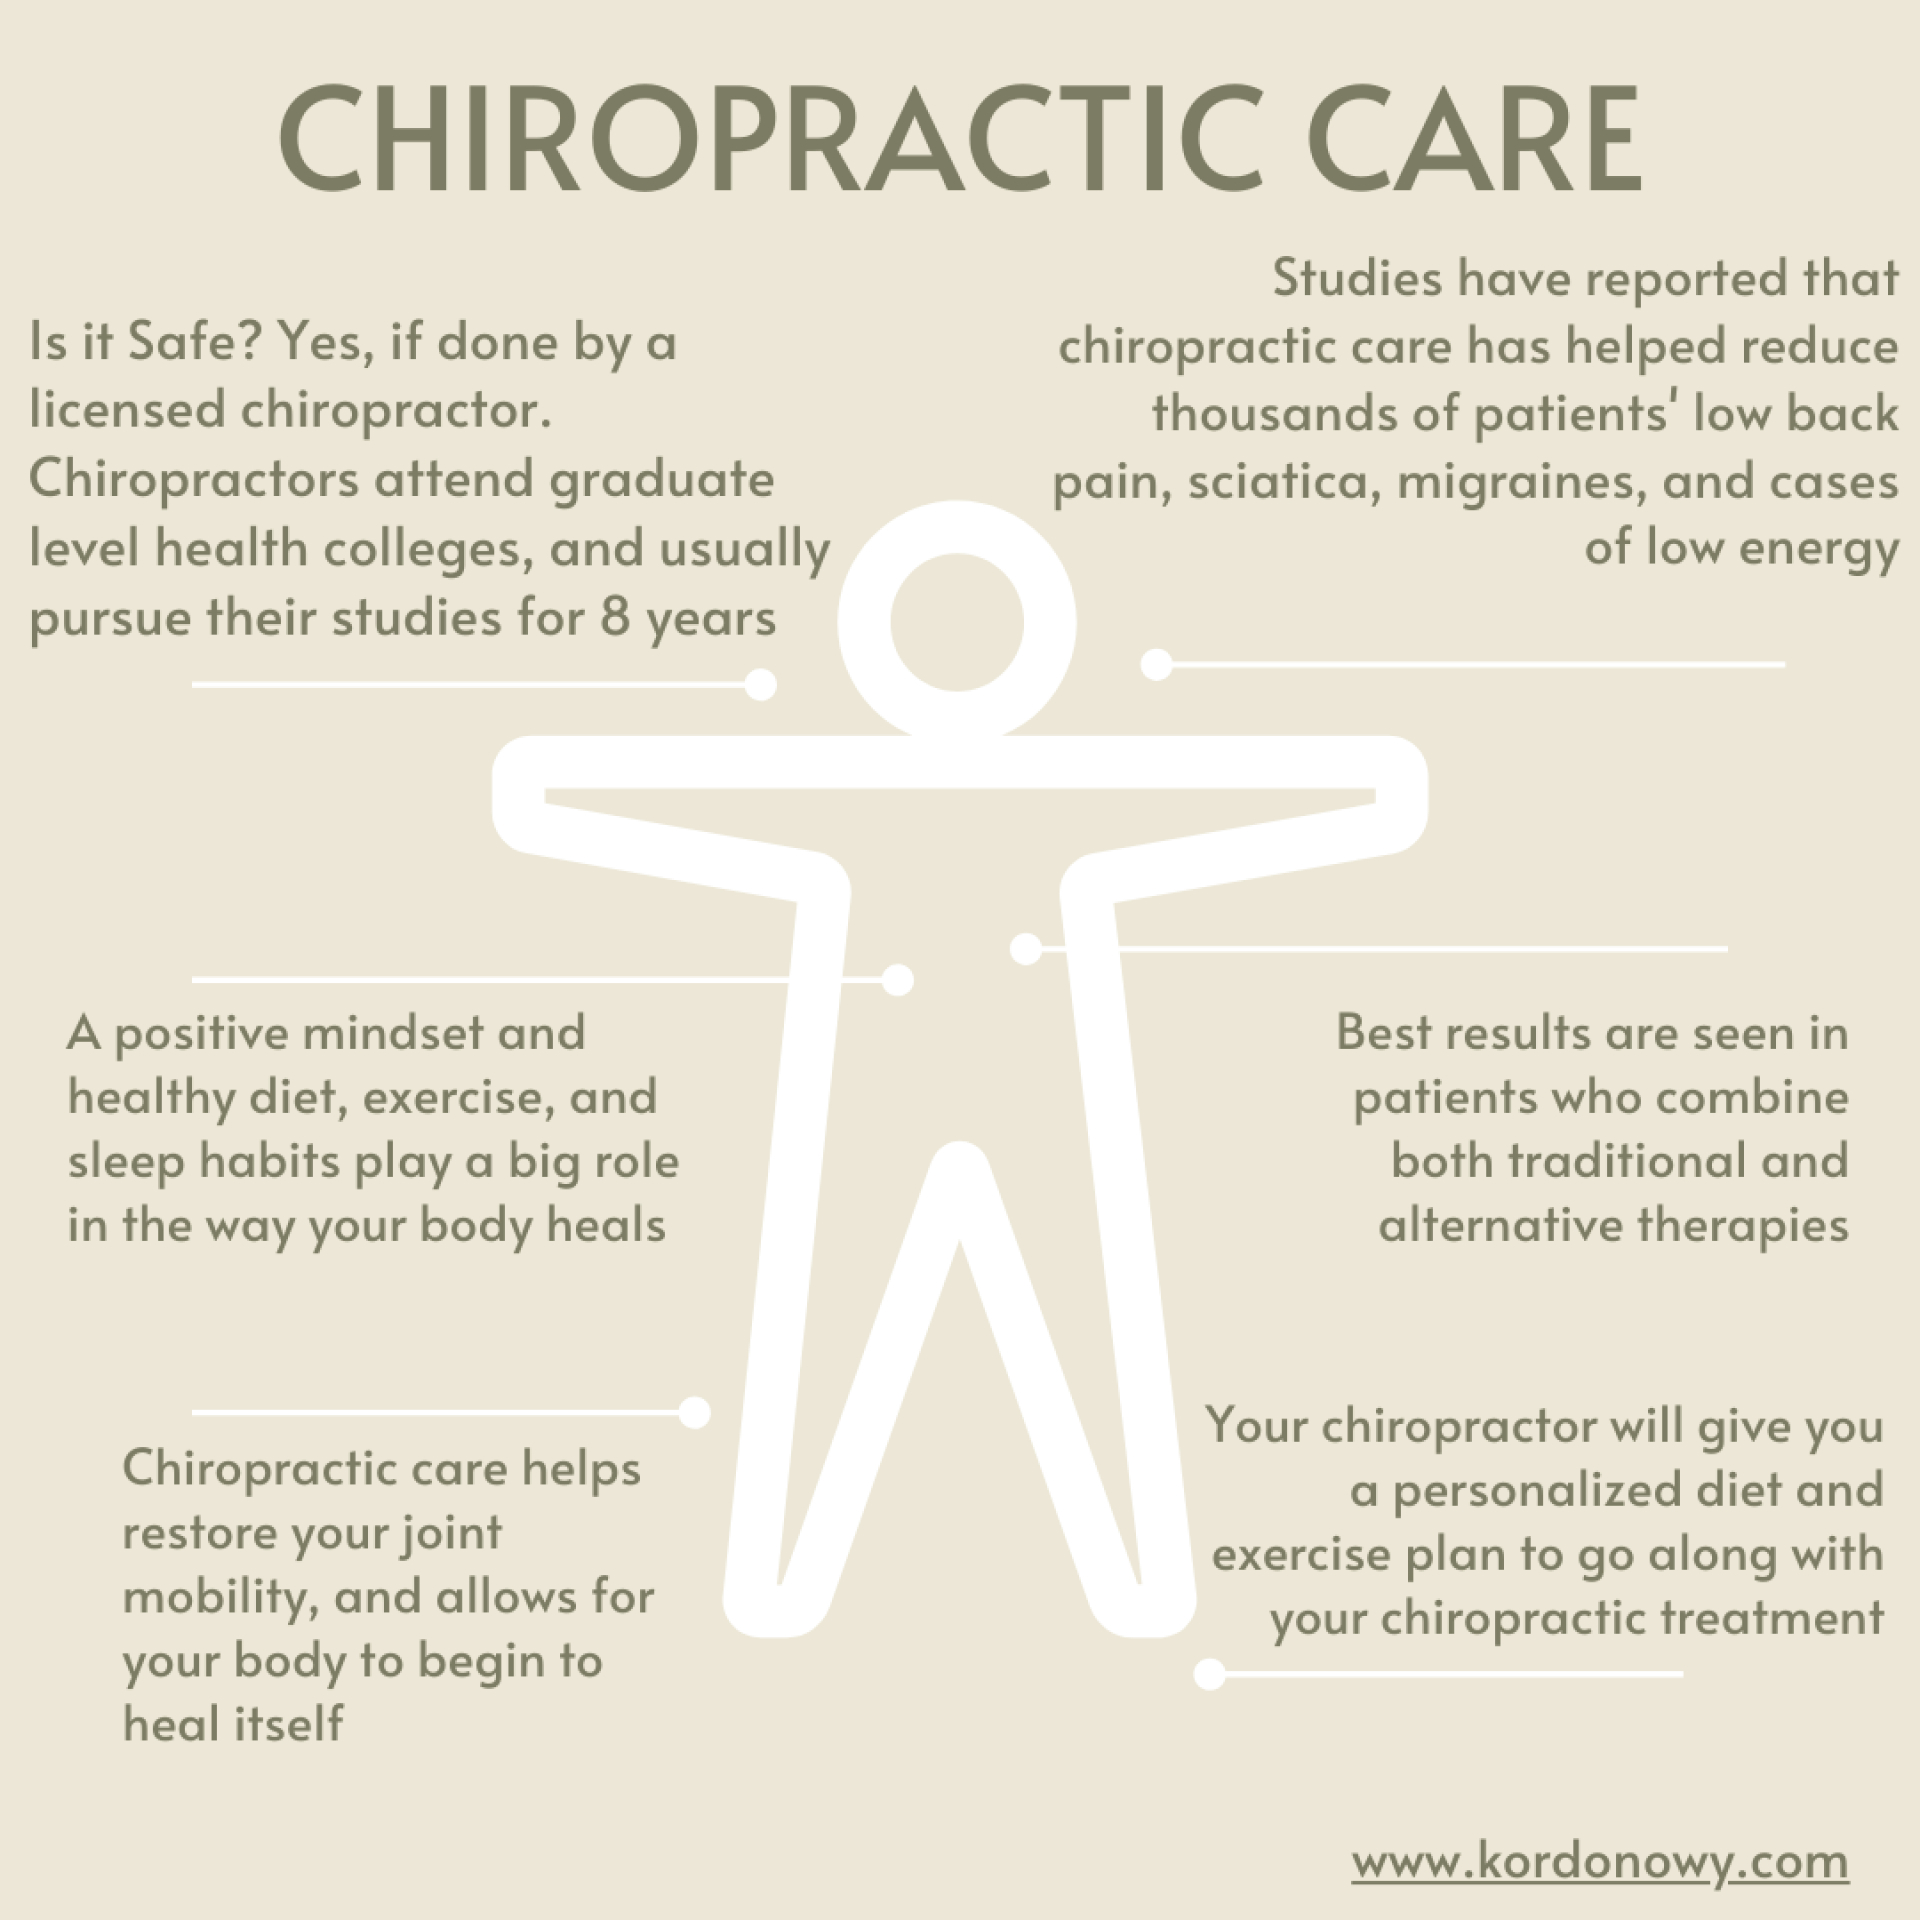 Safety Of Chiropractic Care